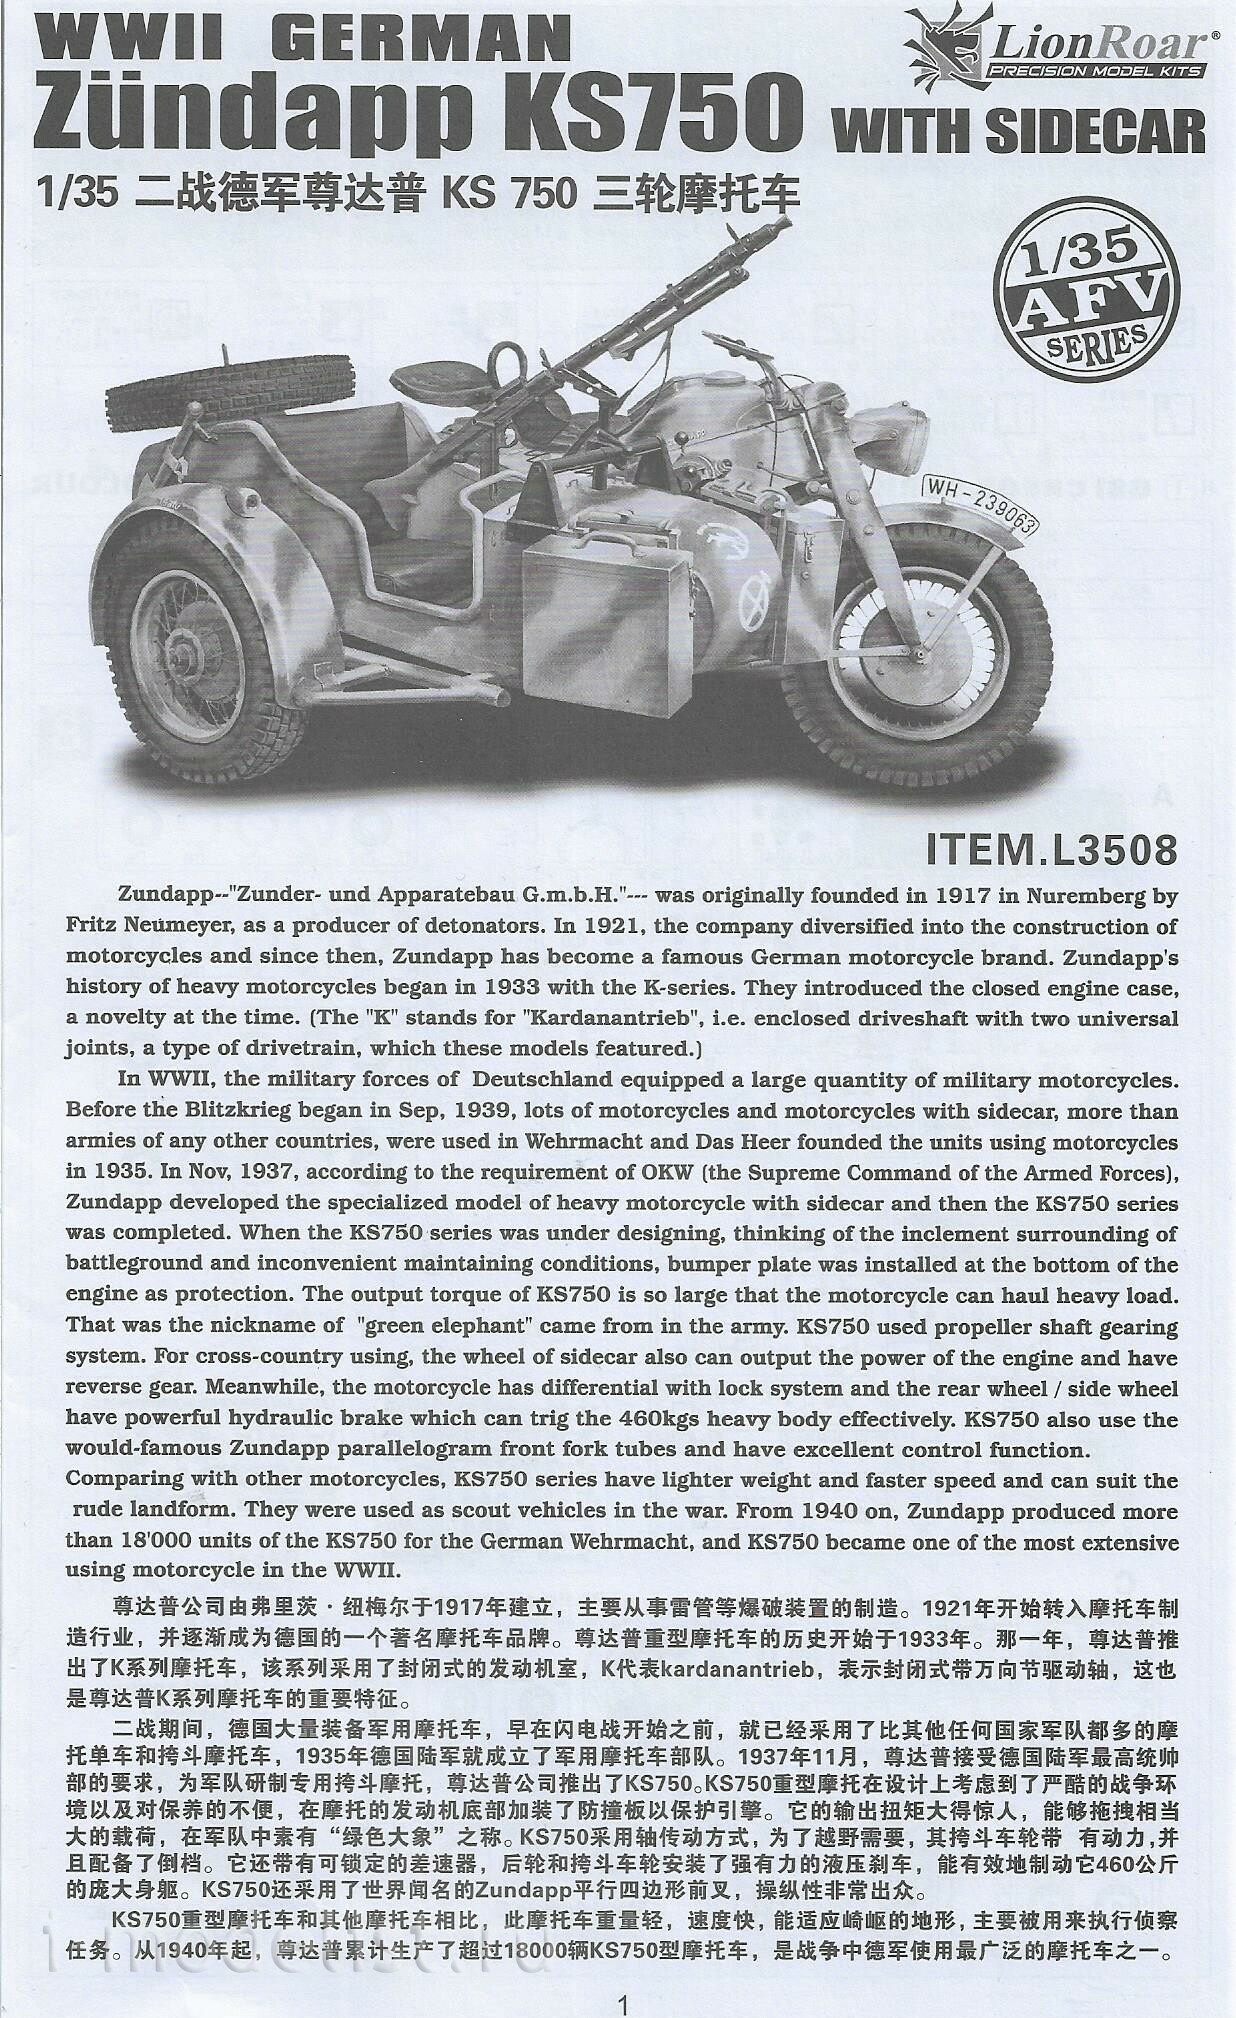 L3508 Great Wall Hobby 1/35 German motorcycle Zundapp Ks 750 with cradle and trolley trailer